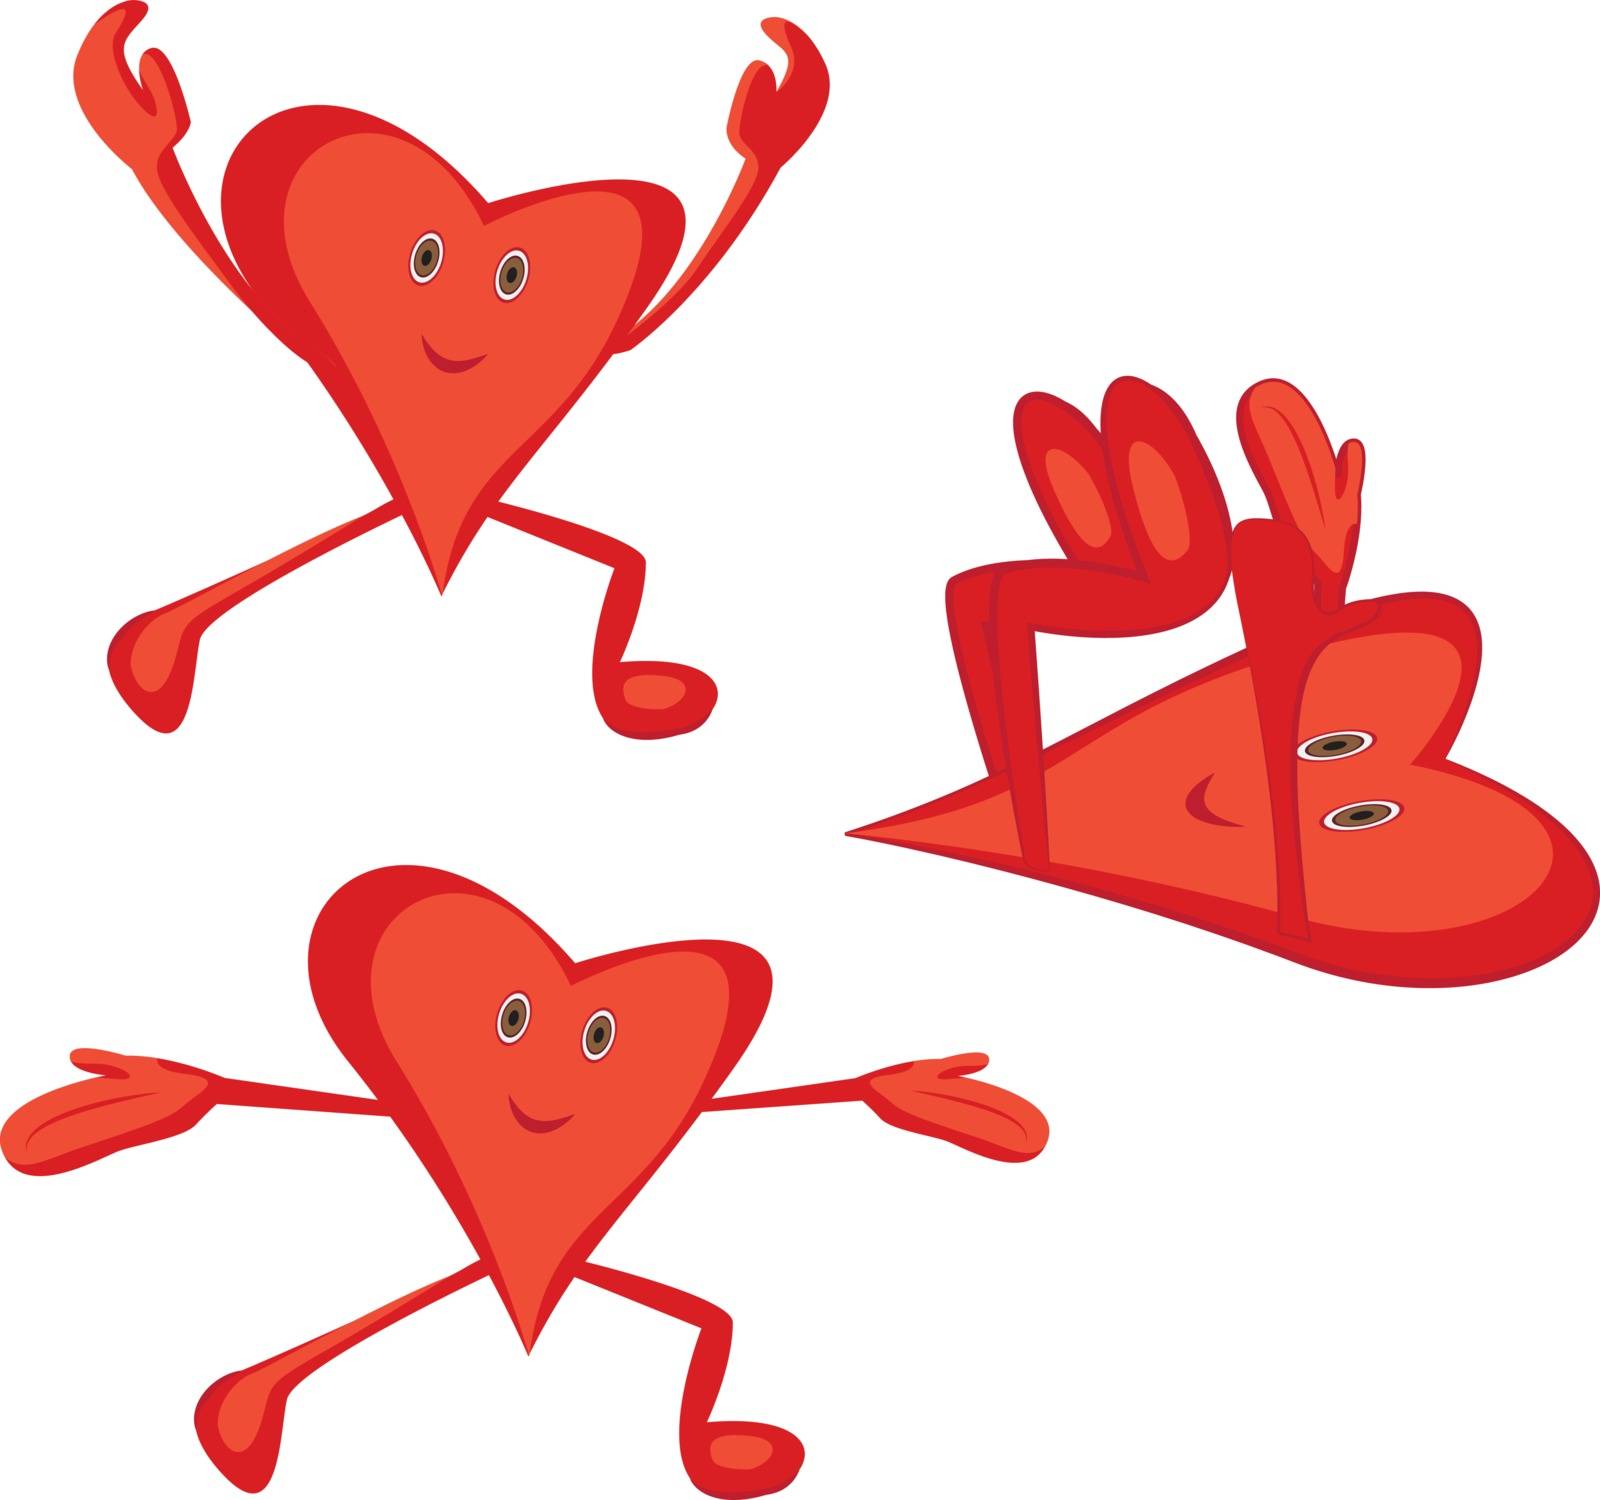 Morning cardio exercises for a healthy heart concept. Cartoon hearts doing morning exercises